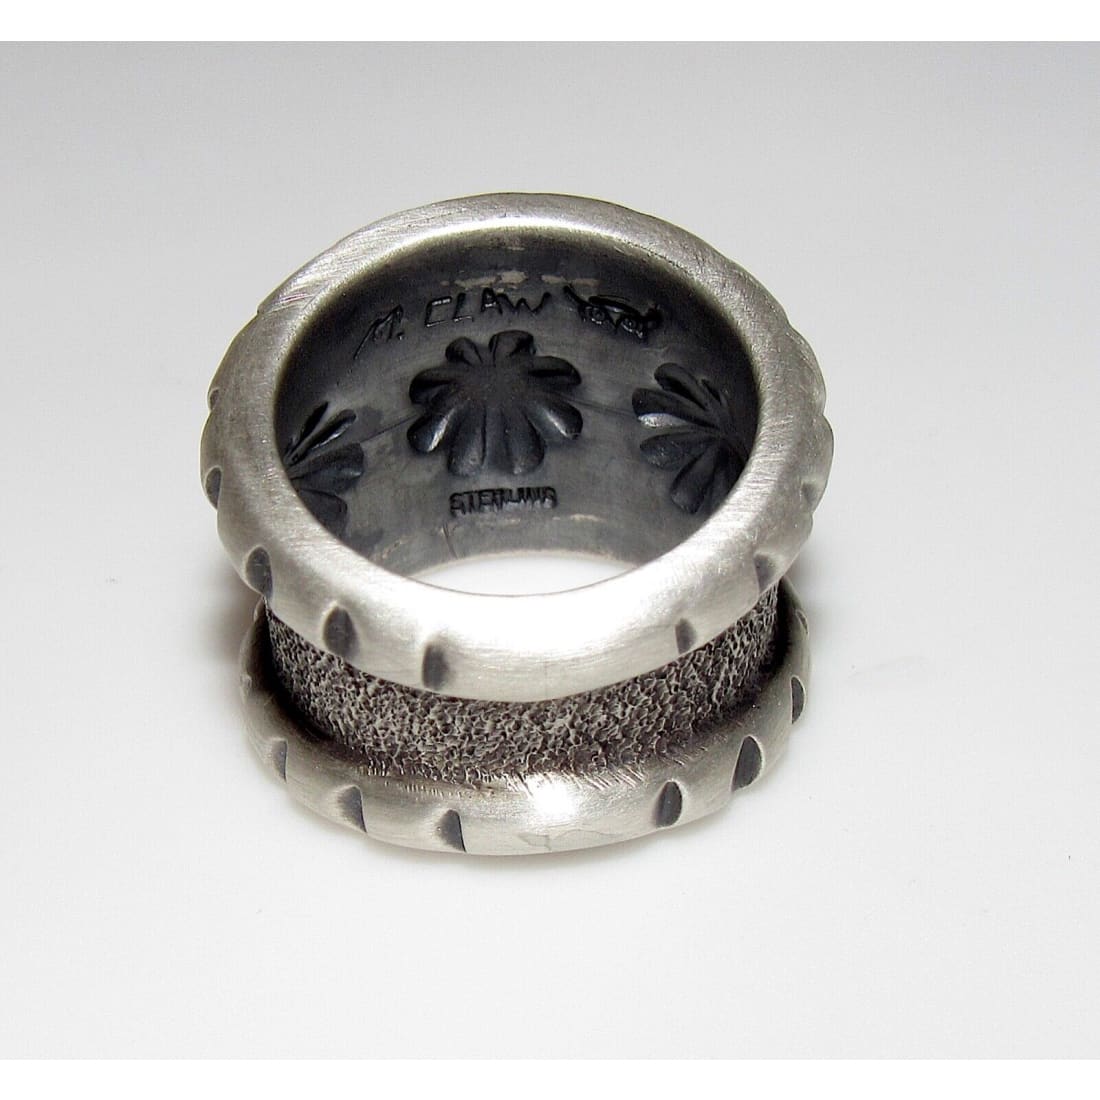 Navajo MONTY CLAW Ring Size 8 Tufa Cast Sterling Silver 